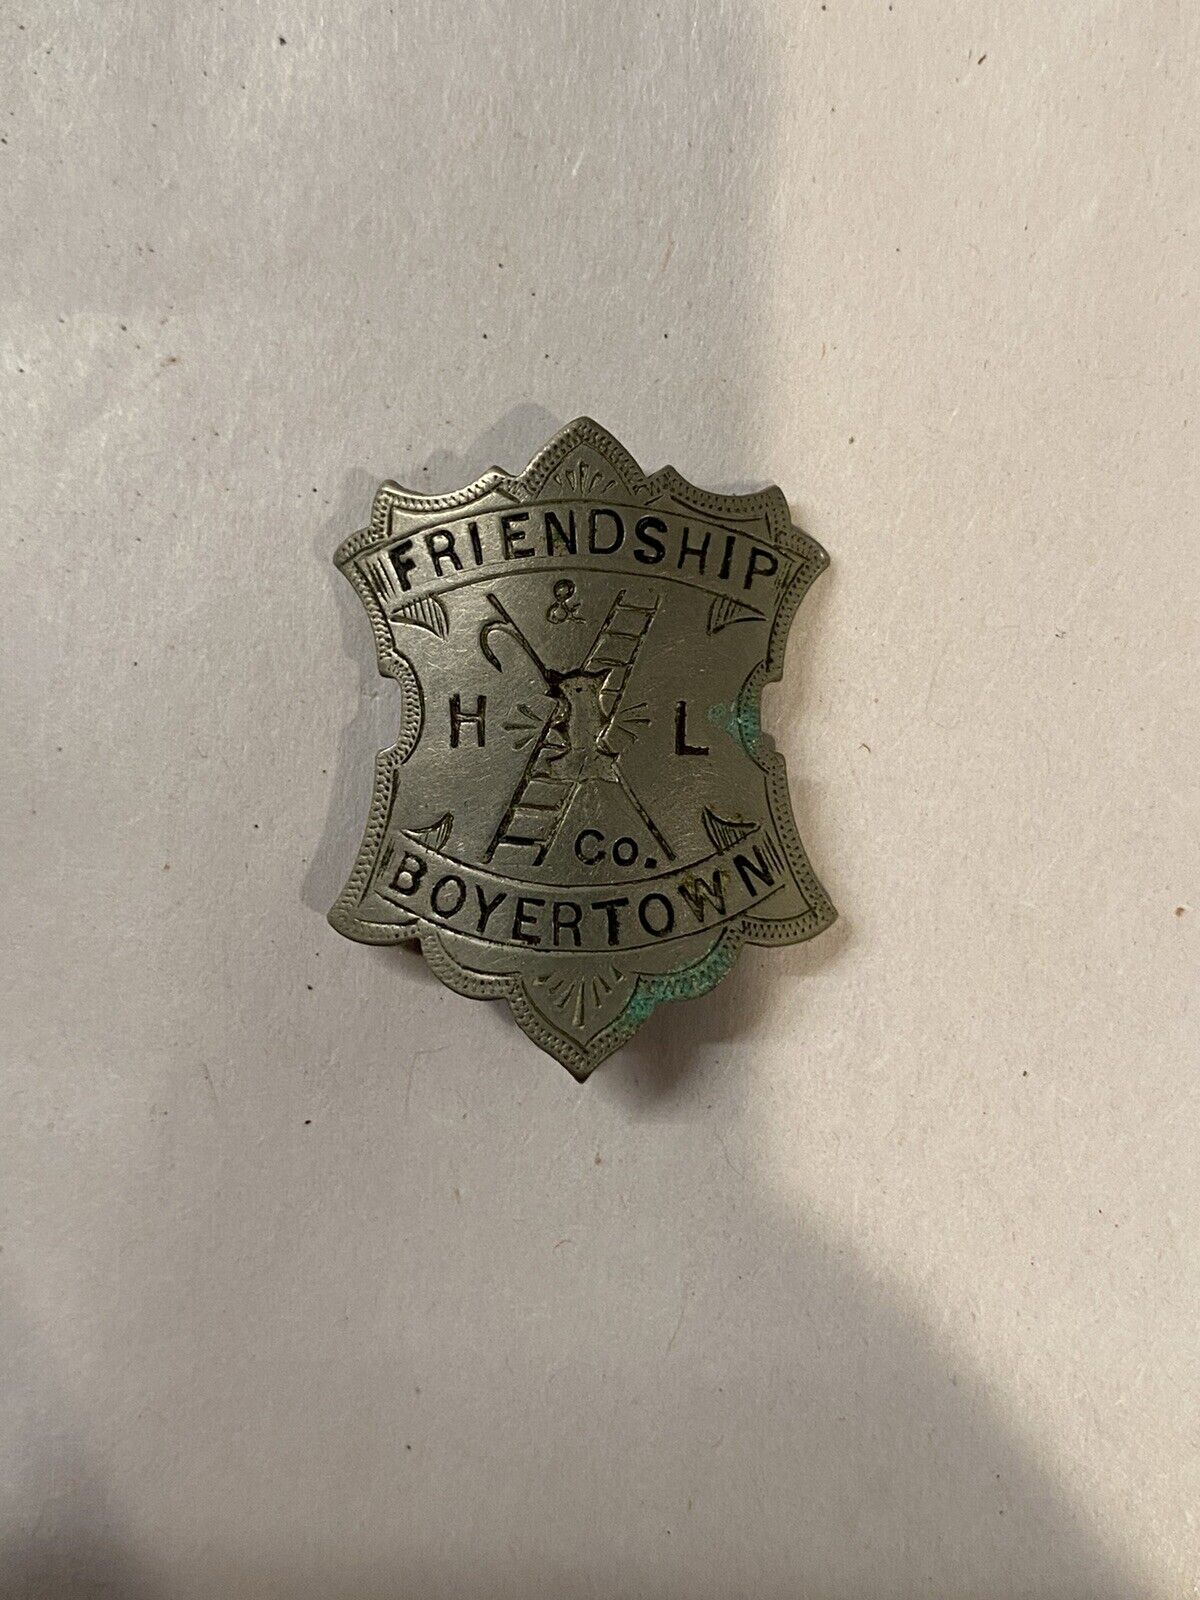 Antique Fire Badge Boyertown Pa - 1800s Hook And Ladder 